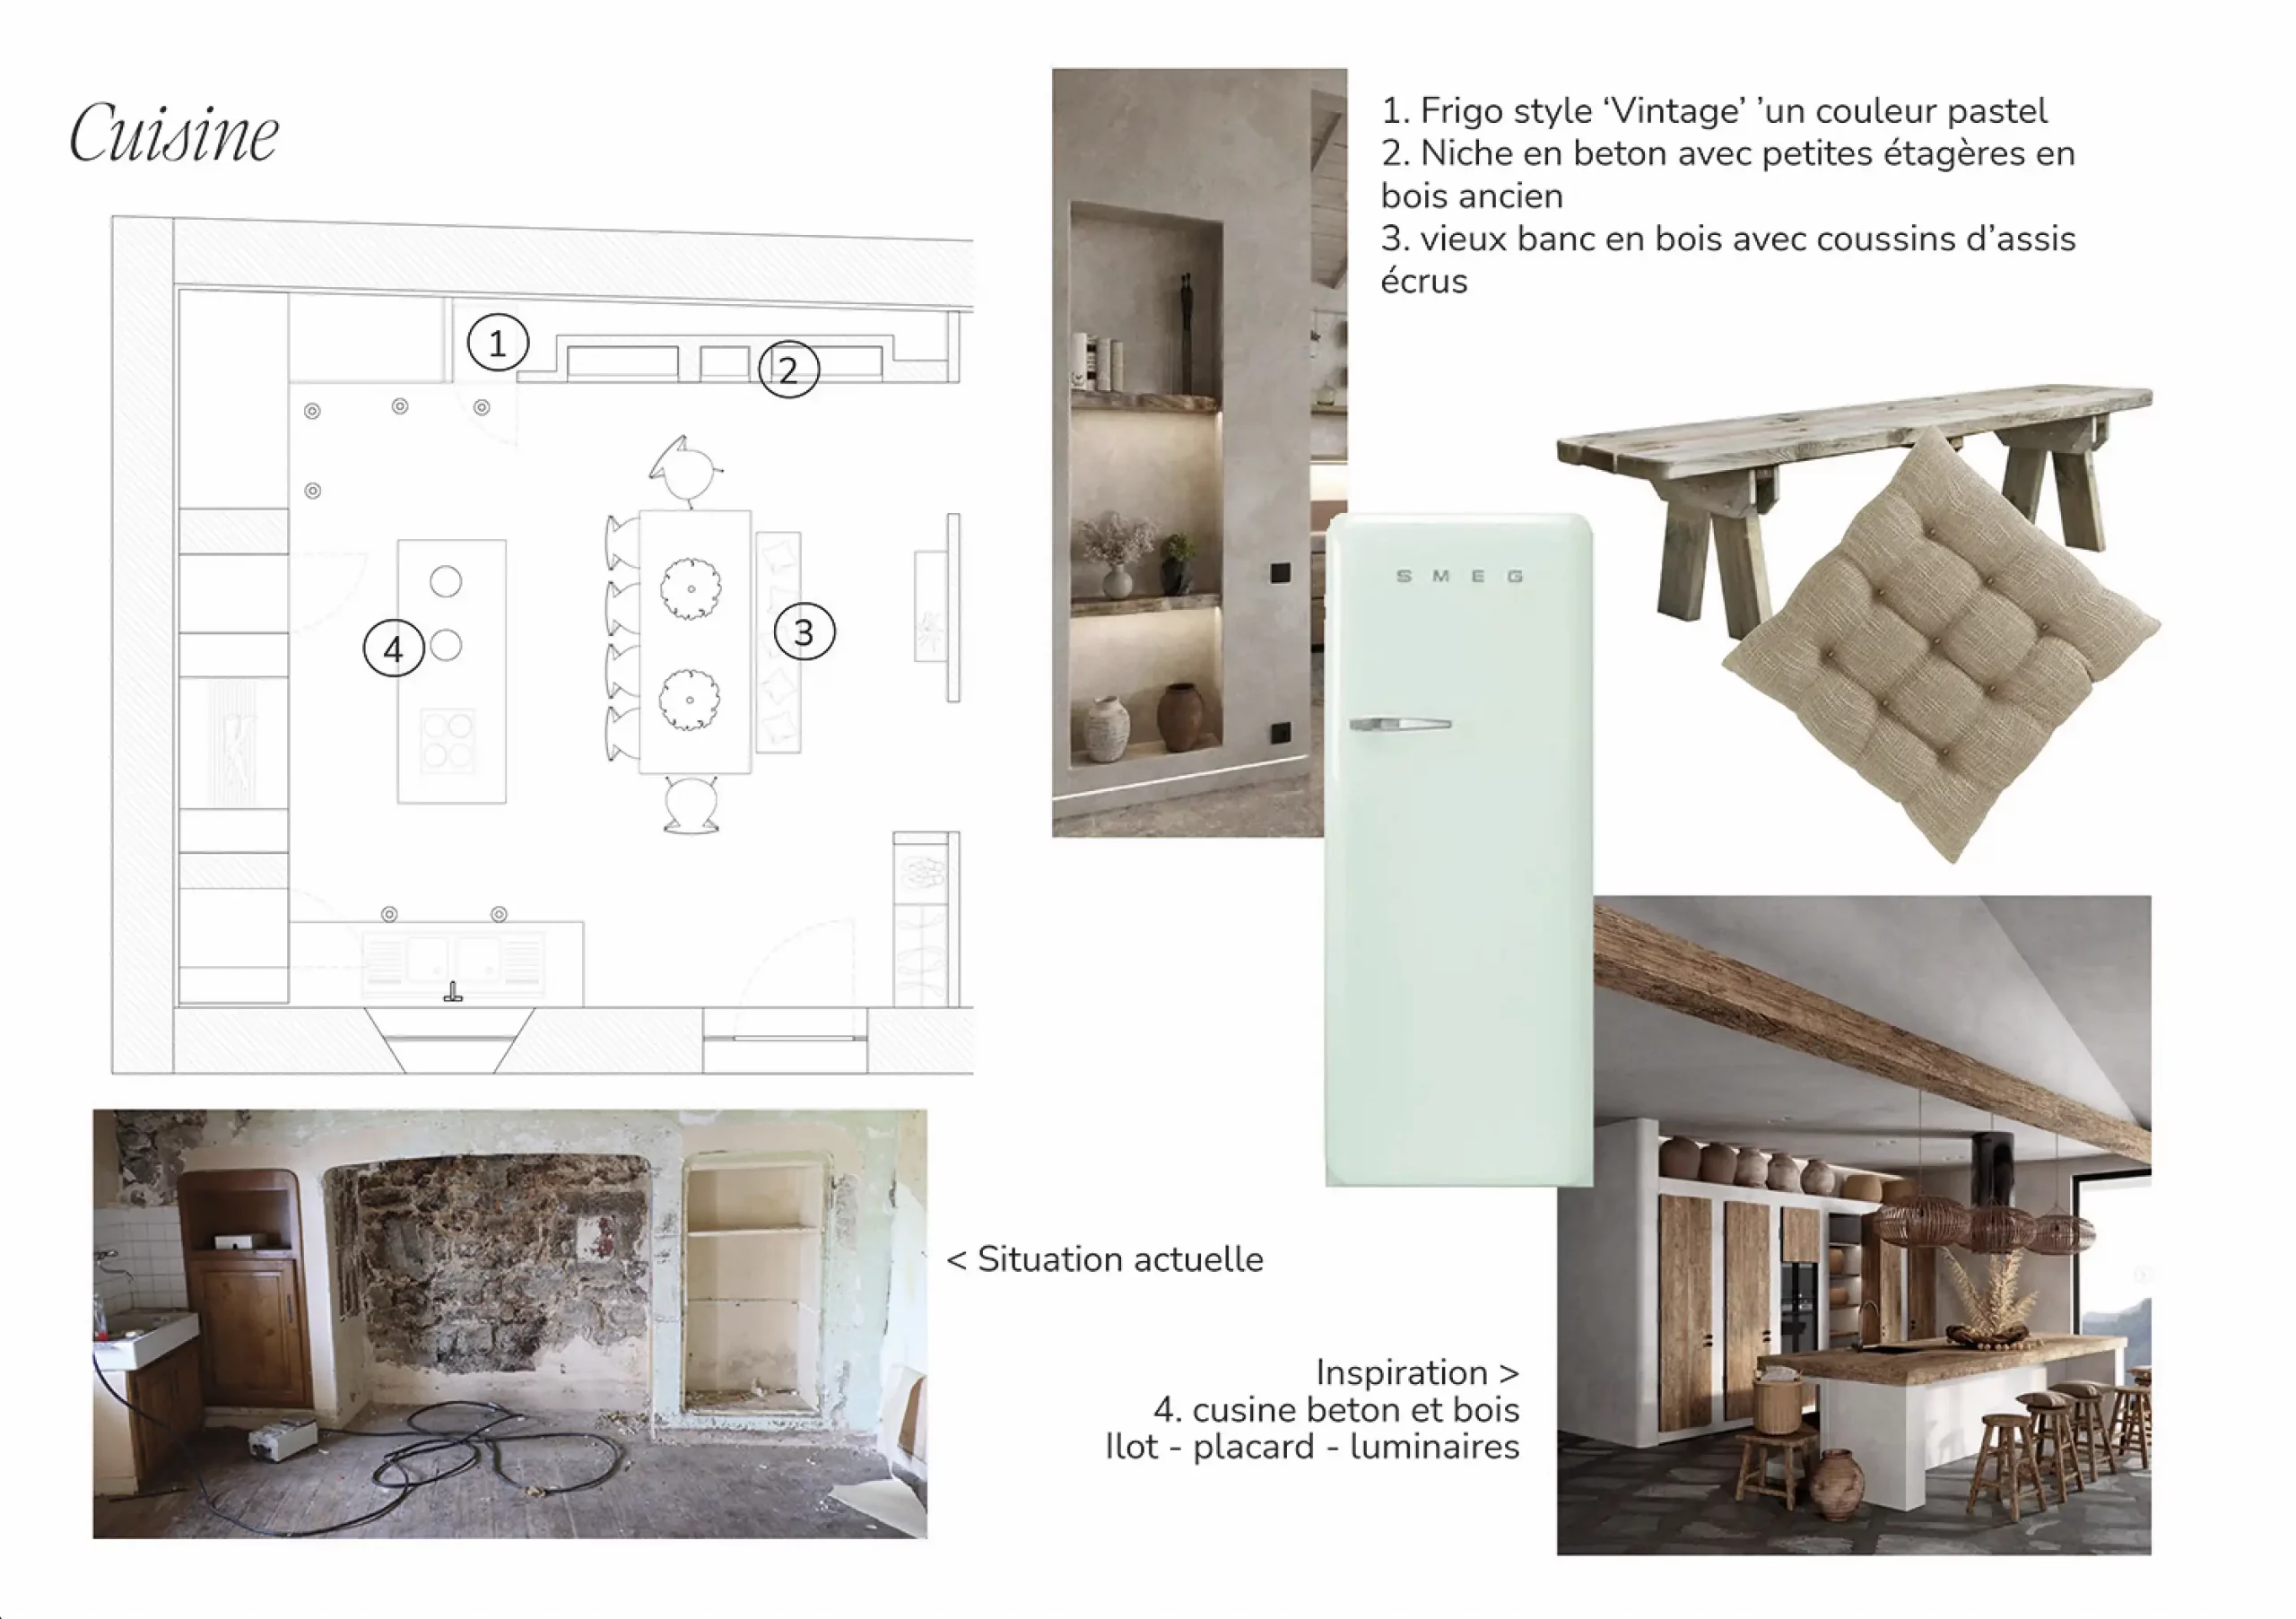 Excerpt from a kitchen renovation project by interior designer Stefania Luraghi, complete with floor plan and photographic inspiration for development.